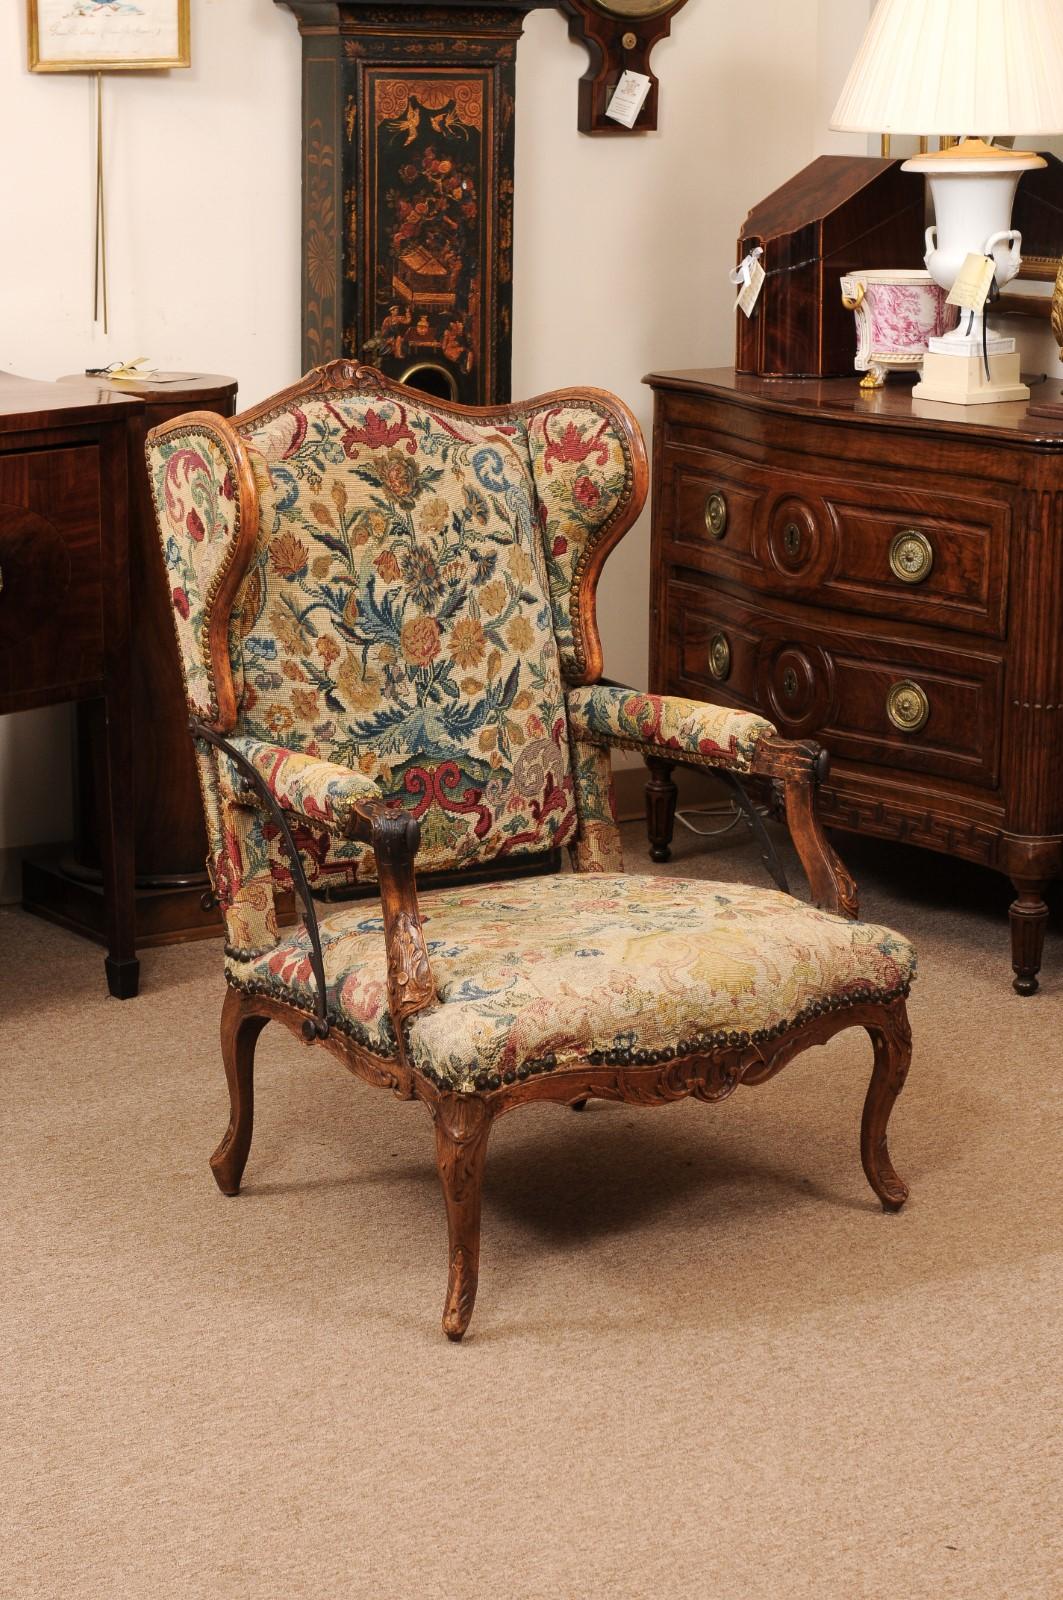 Early 18th Century French Regence Period Walnut Ratchet Wing Chair with Needlework Upholstery